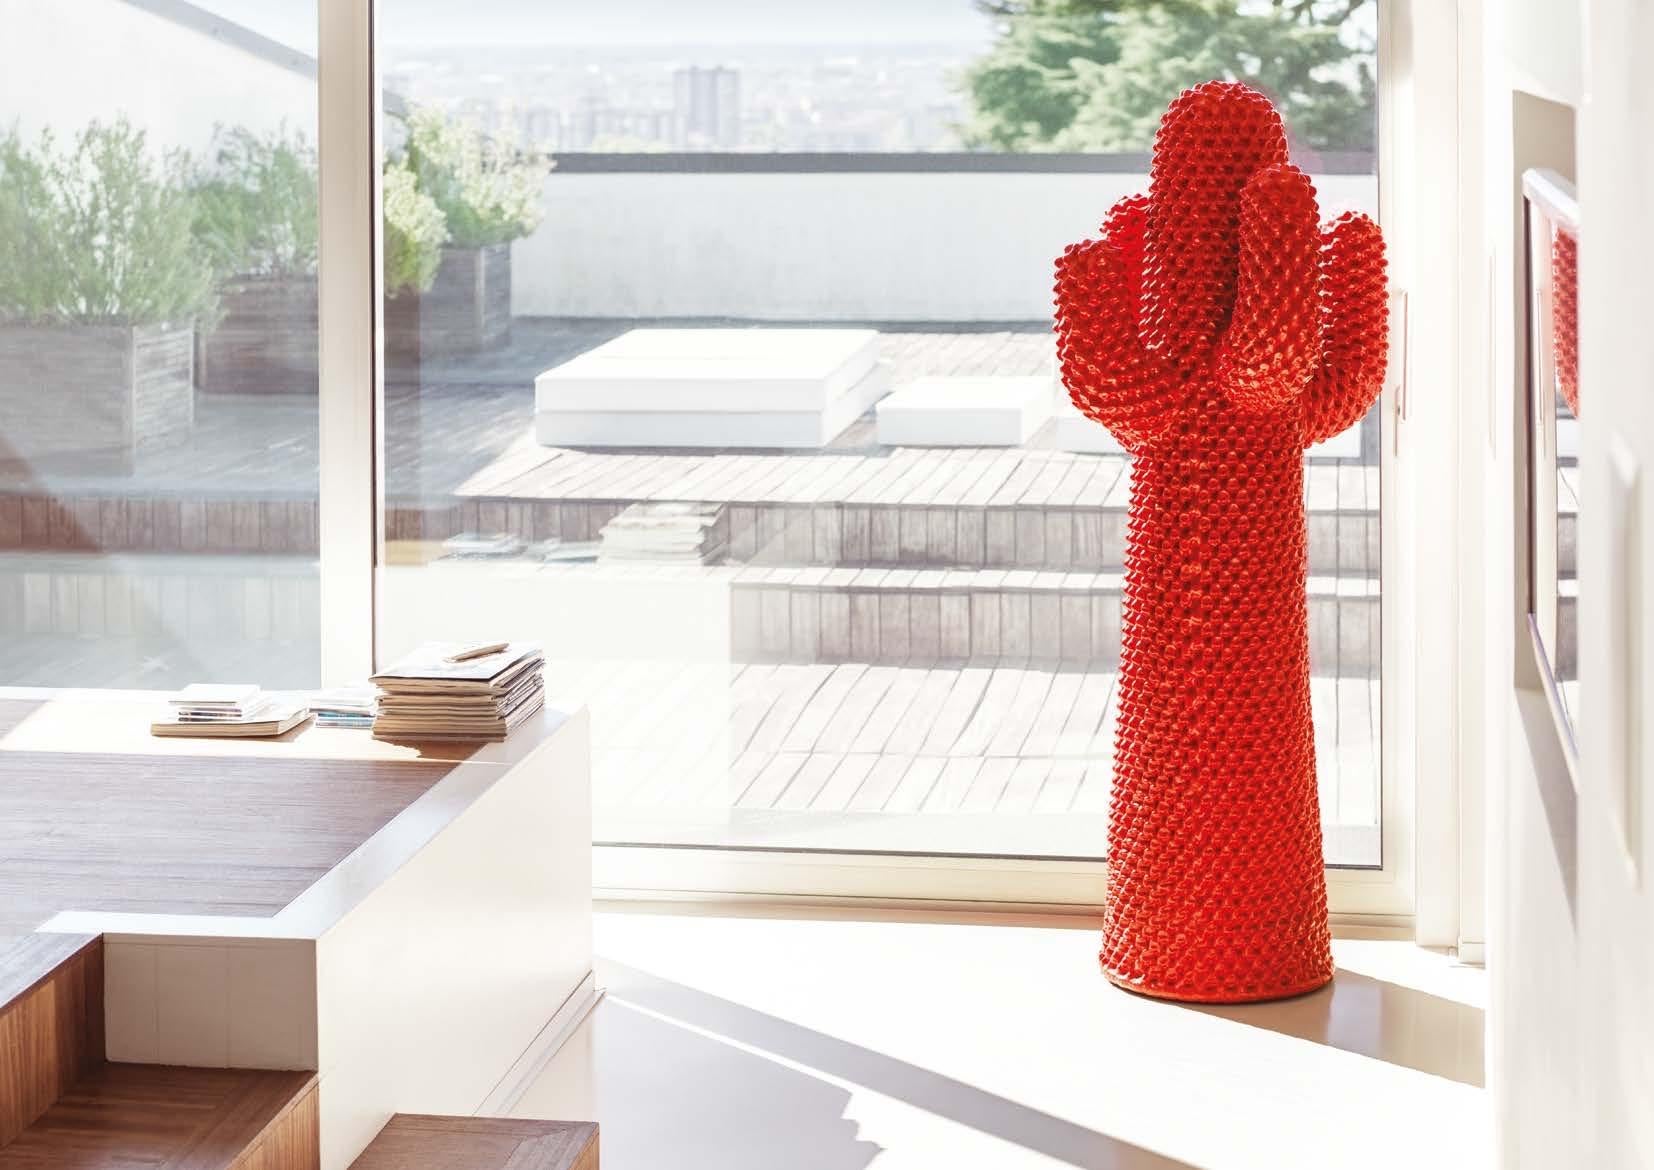 Gufram Cactus Rosso CoatRacks Sculpture By Drocco/Mello, Limited Edition of 500 In New Condition For Sale In Beverly Hills, CA